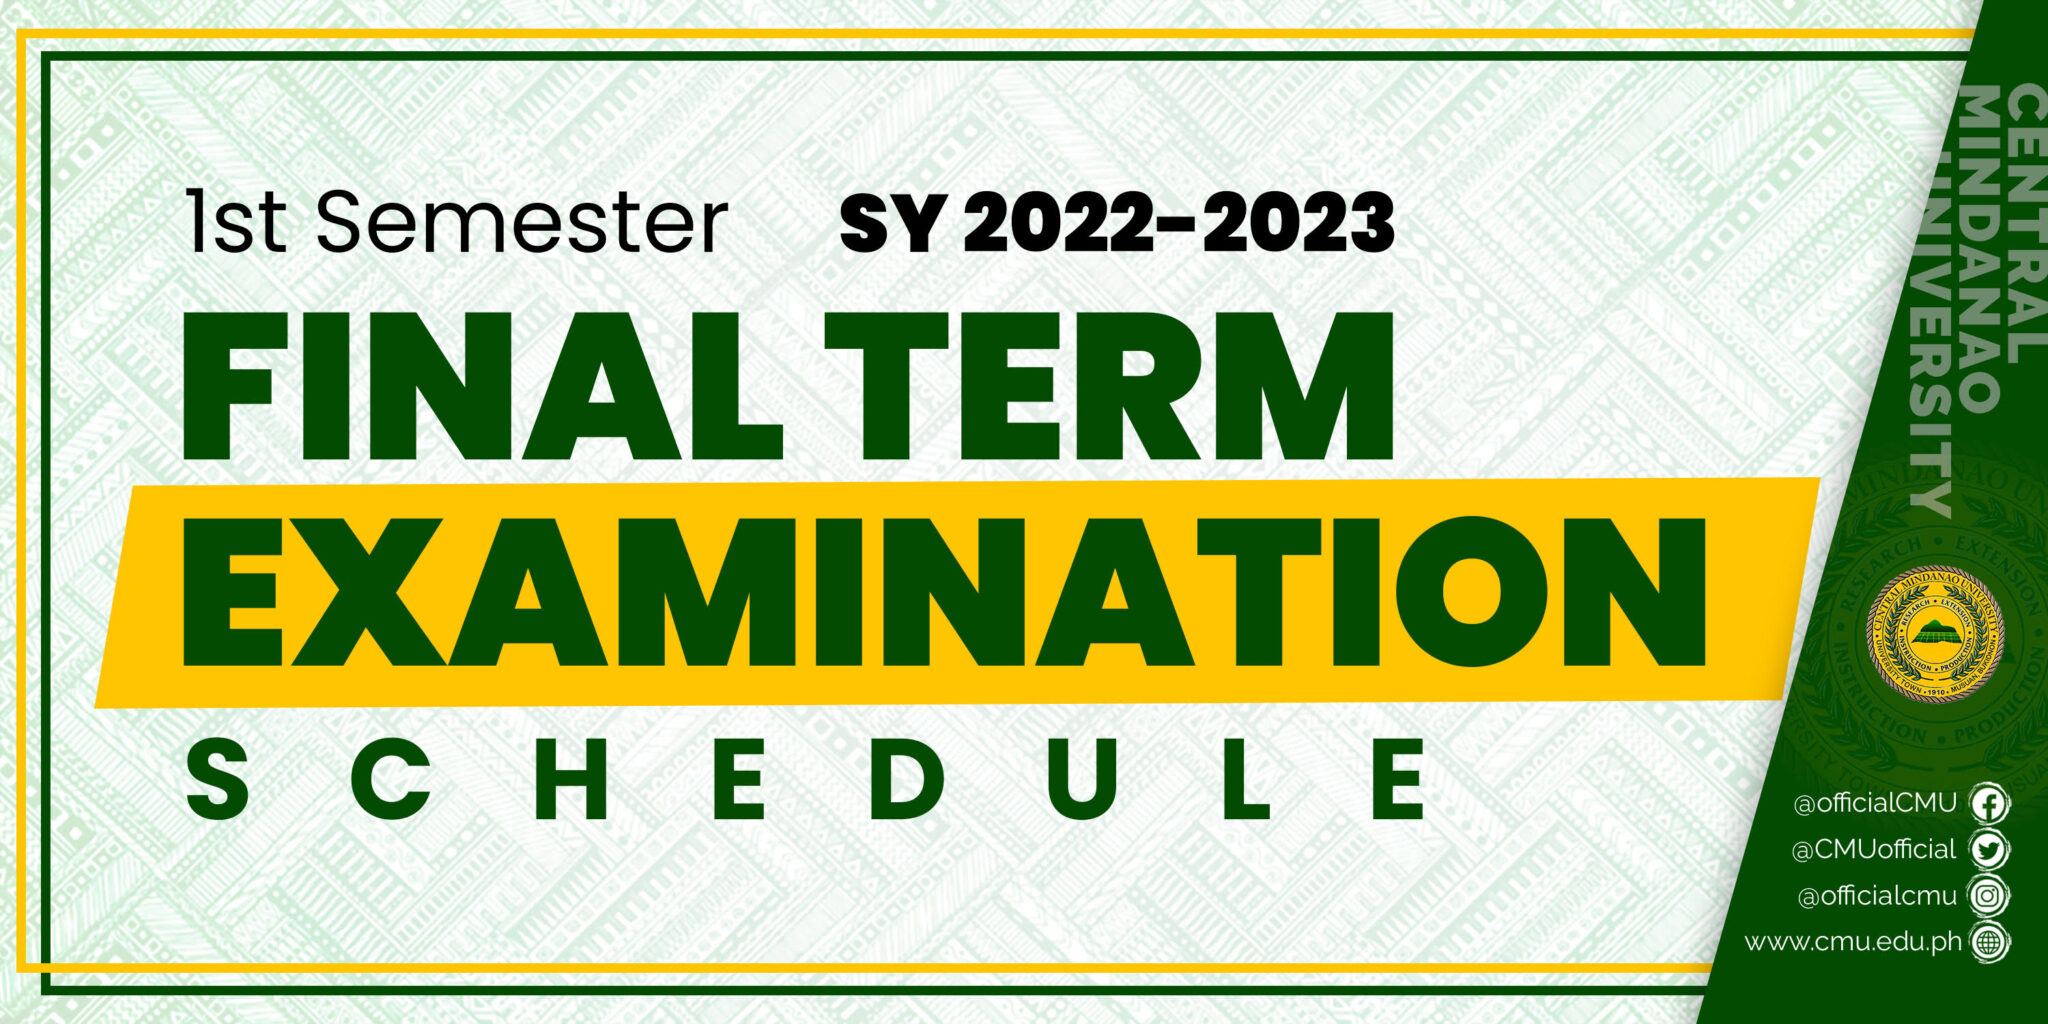 Final Term Examination Schedule, 1st Semester S.Y. 20222023 Central